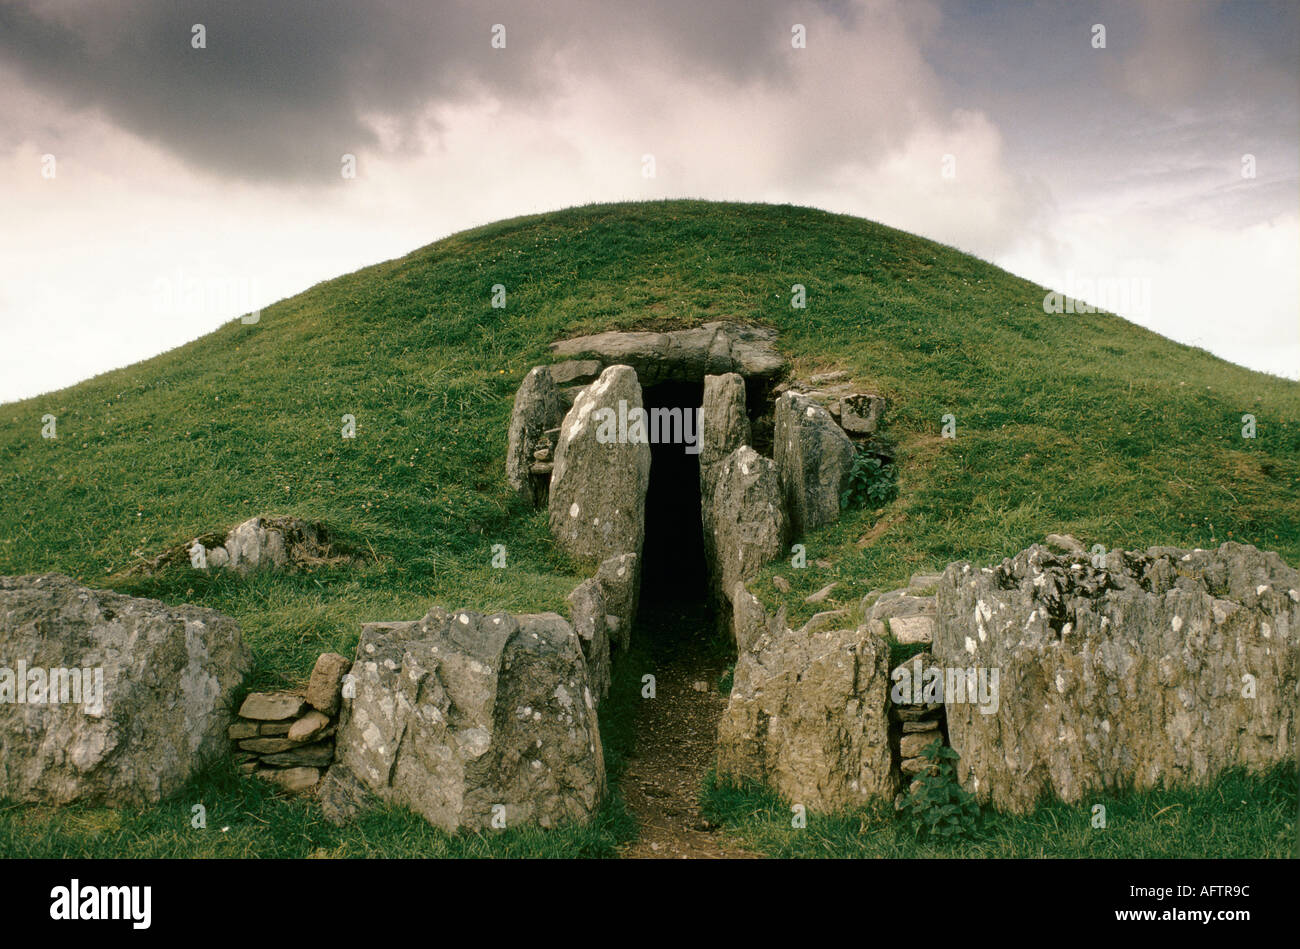 Bryn Celli Ddu, a neolithic passage grave near Llanddaniel Fab, Anglesey, Wales, UK. HOMER SYKES Stock Photo